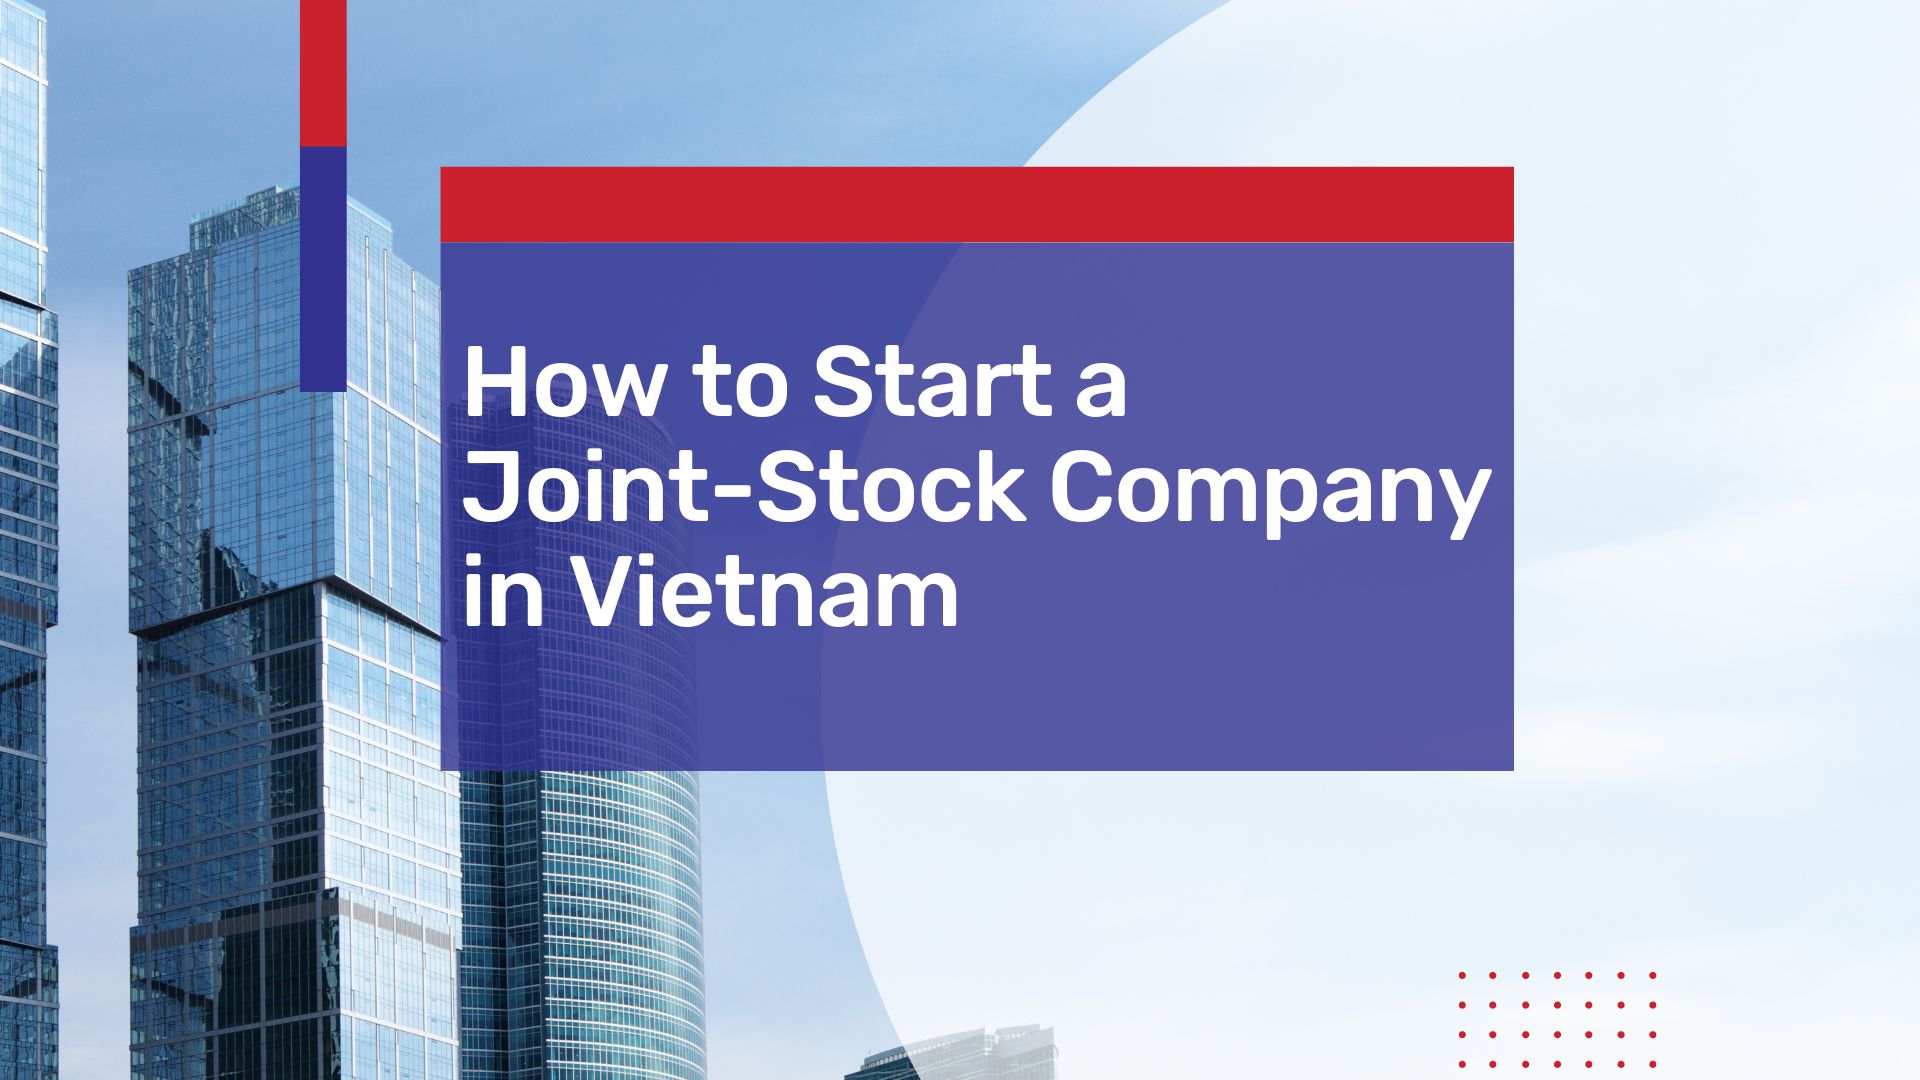 How to Start a Joint Stock Company (JSC) in Vietnam